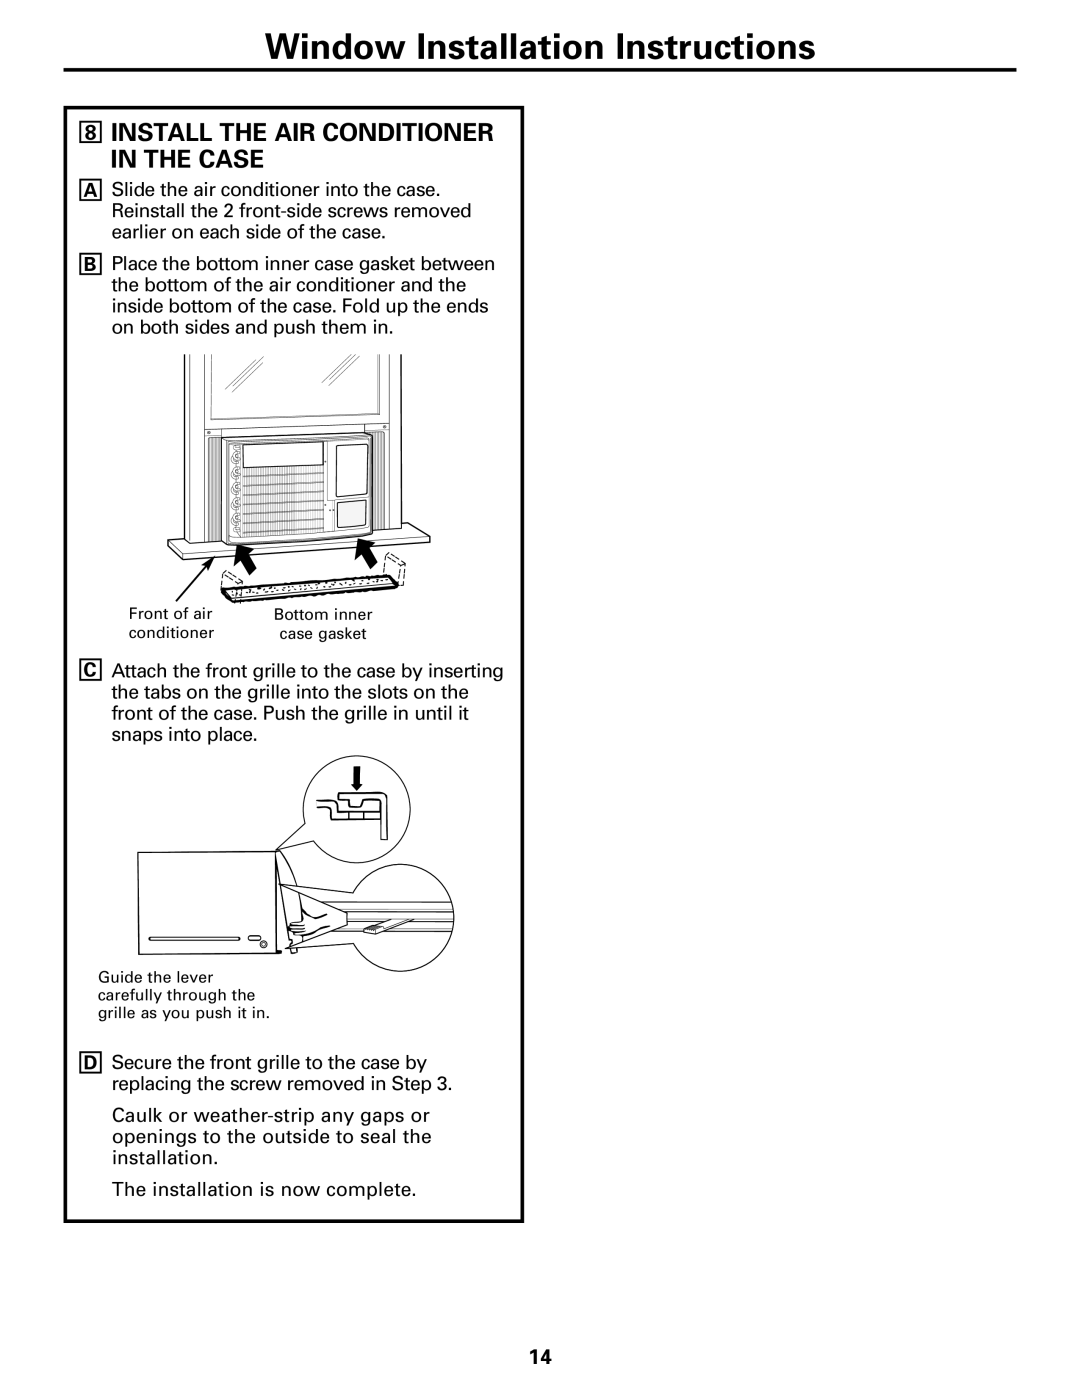 GE ASQ18, ASM14*, ASM24* installation instructions Install The Air Conditioner In The Case, Window Installation Instructions 